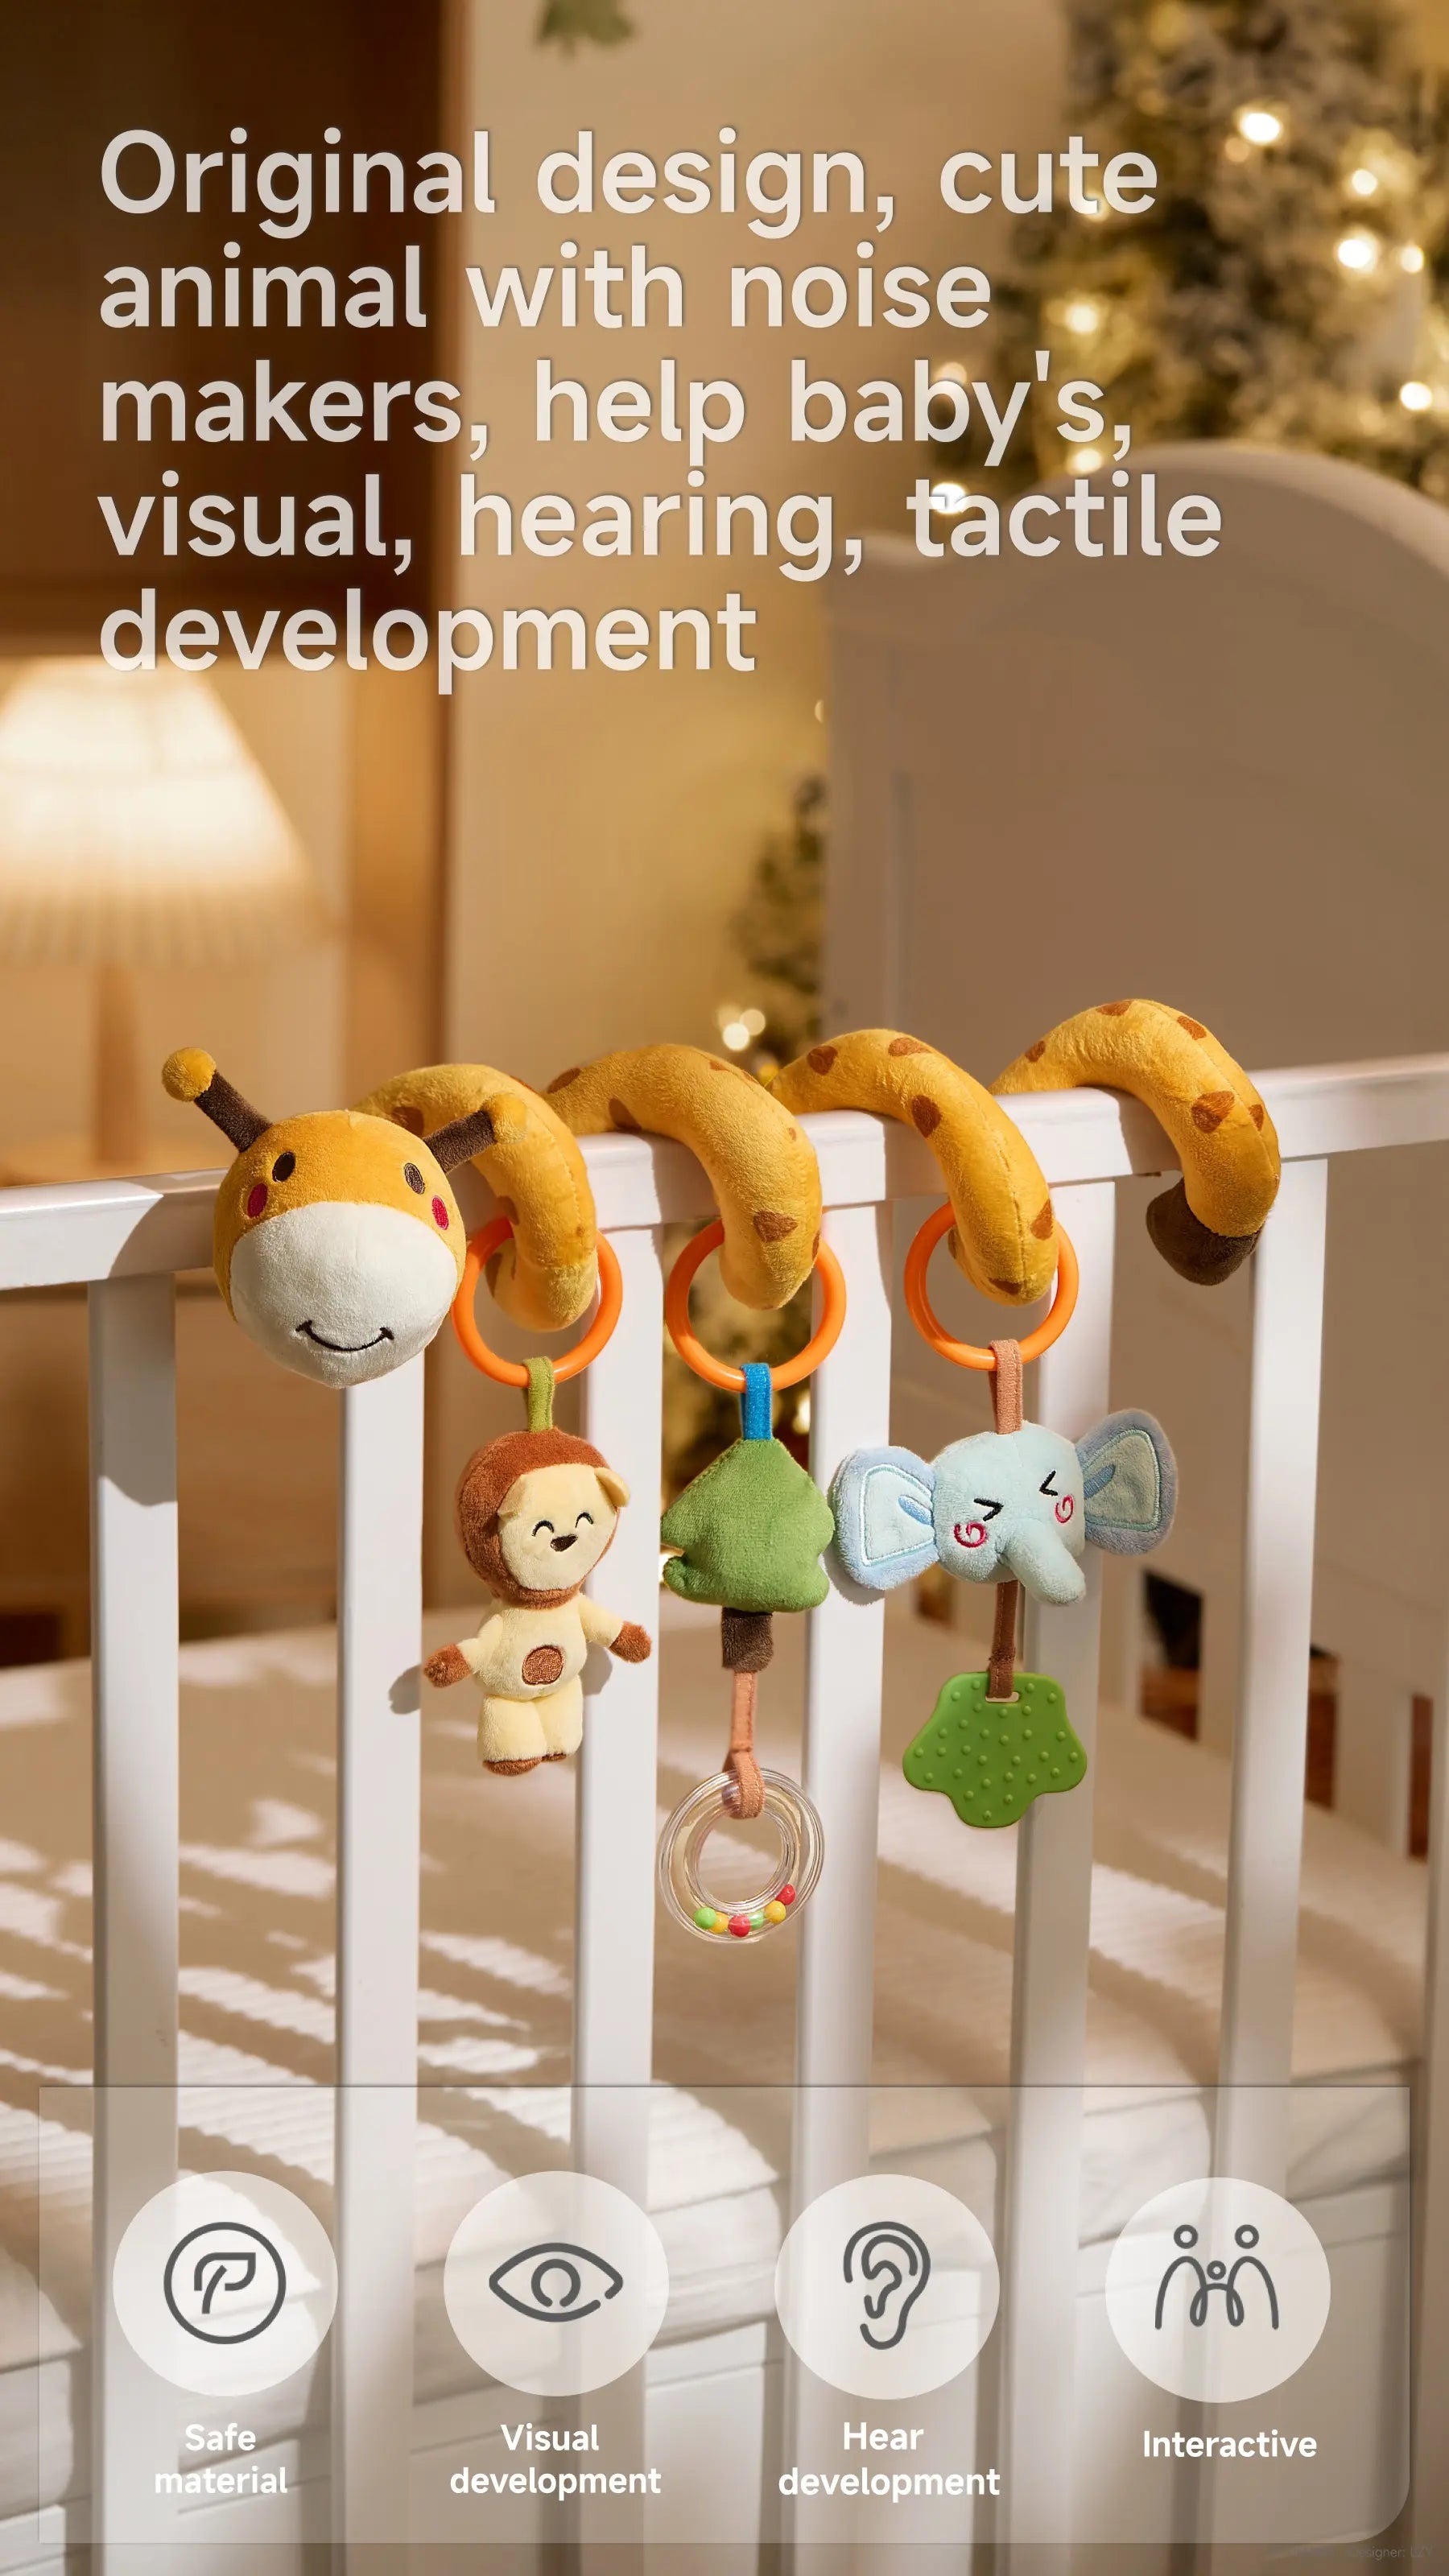 Animal arch toys with rattling teether